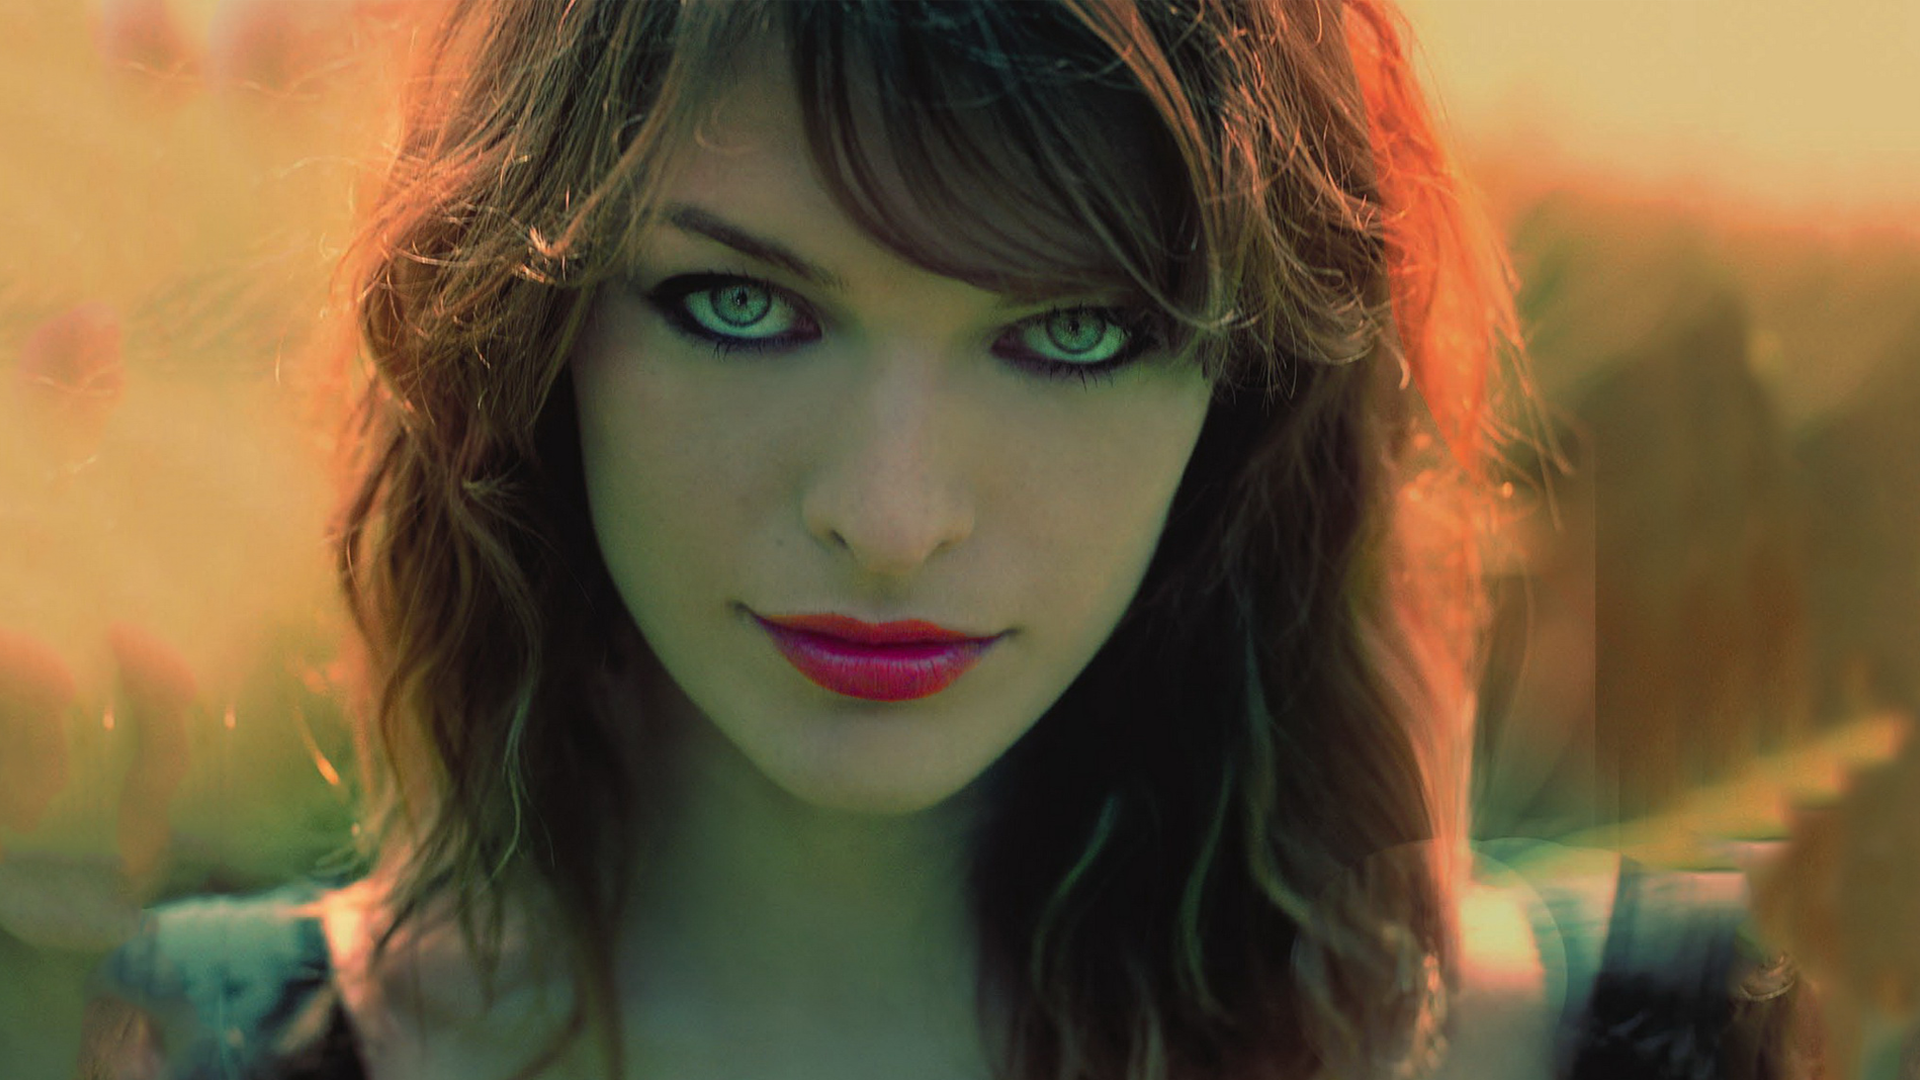 Milla Jovovich Wallpaper Image Photos Pictures Background